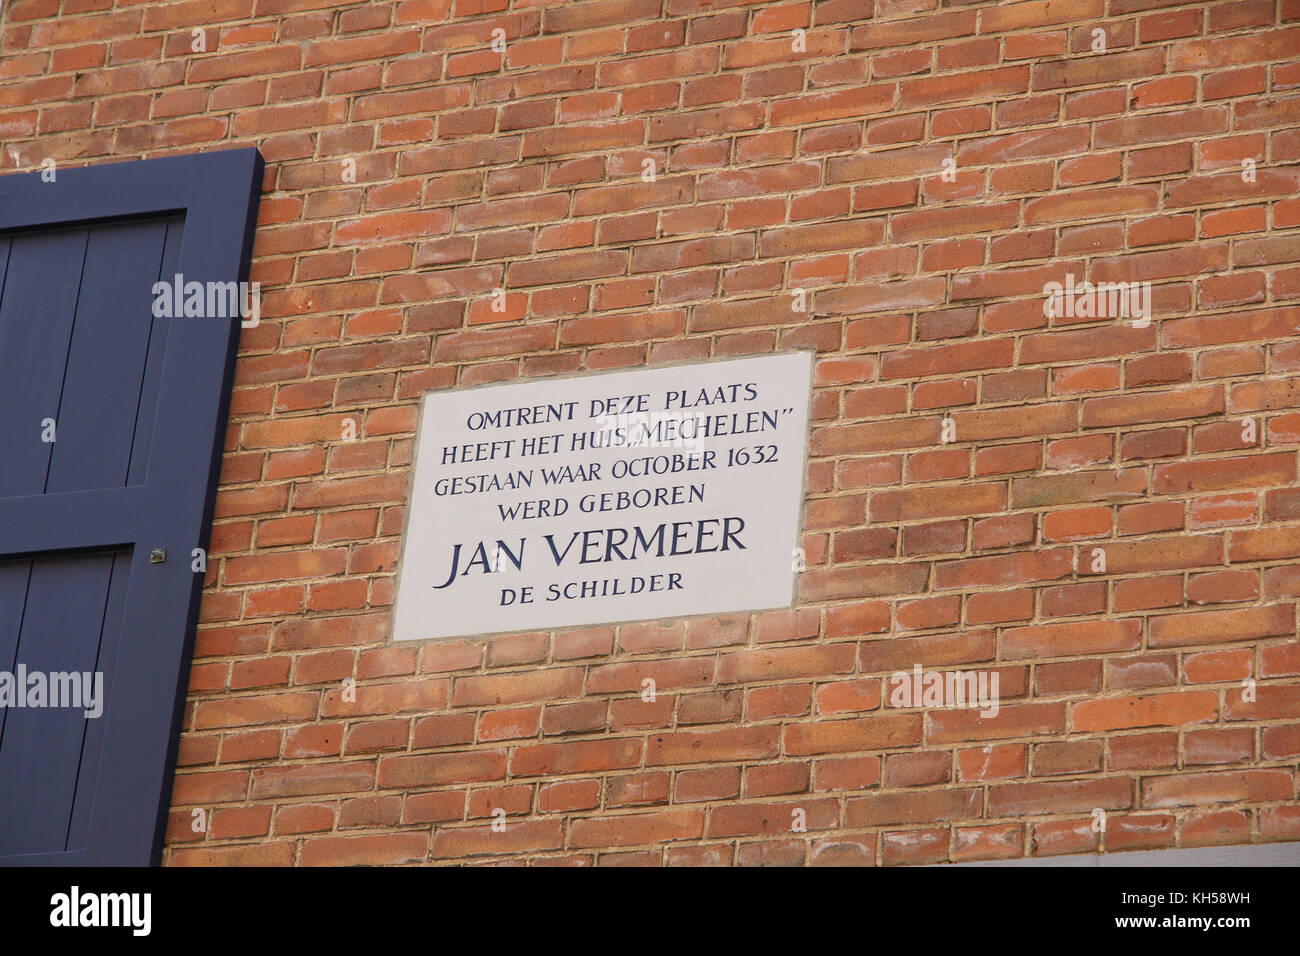 Plaque in Delft, Netherlands, marking the site of the house where the painter Jan Vermeer was born in October 1632. Stock Photo